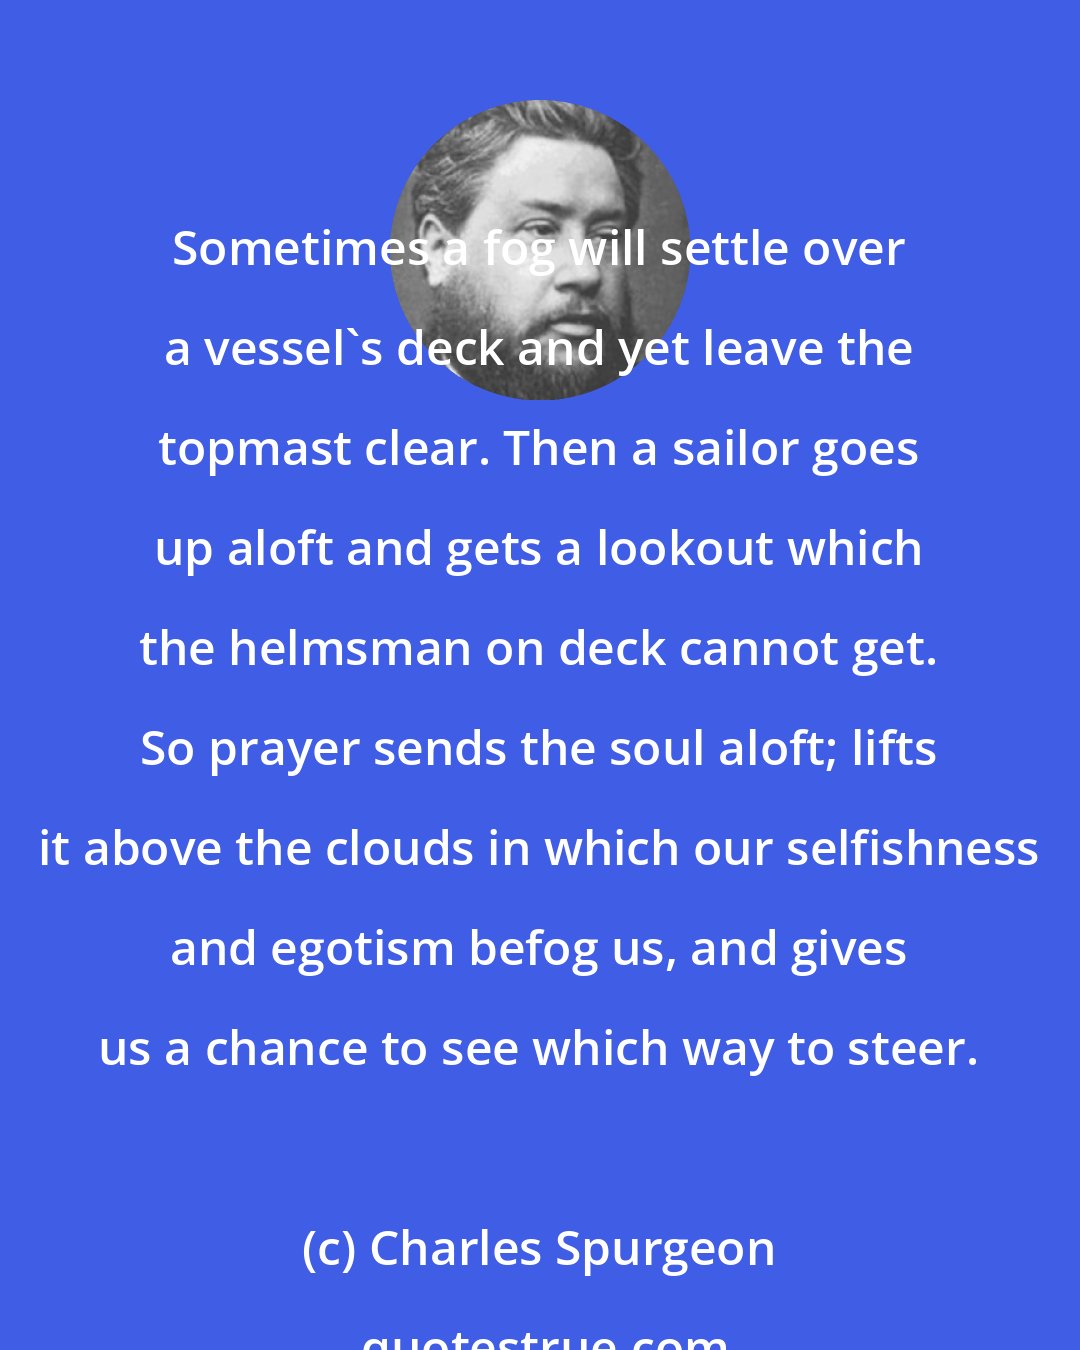 Charles Spurgeon: Sometimes a fog will settle over a vessel's deck and yet leave the topmast clear. Then a sailor goes up aloft and gets a lookout which the helmsman on deck cannot get. So prayer sends the soul aloft; lifts it above the clouds in which our selfishness and egotism befog us, and gives us a chance to see which way to steer.